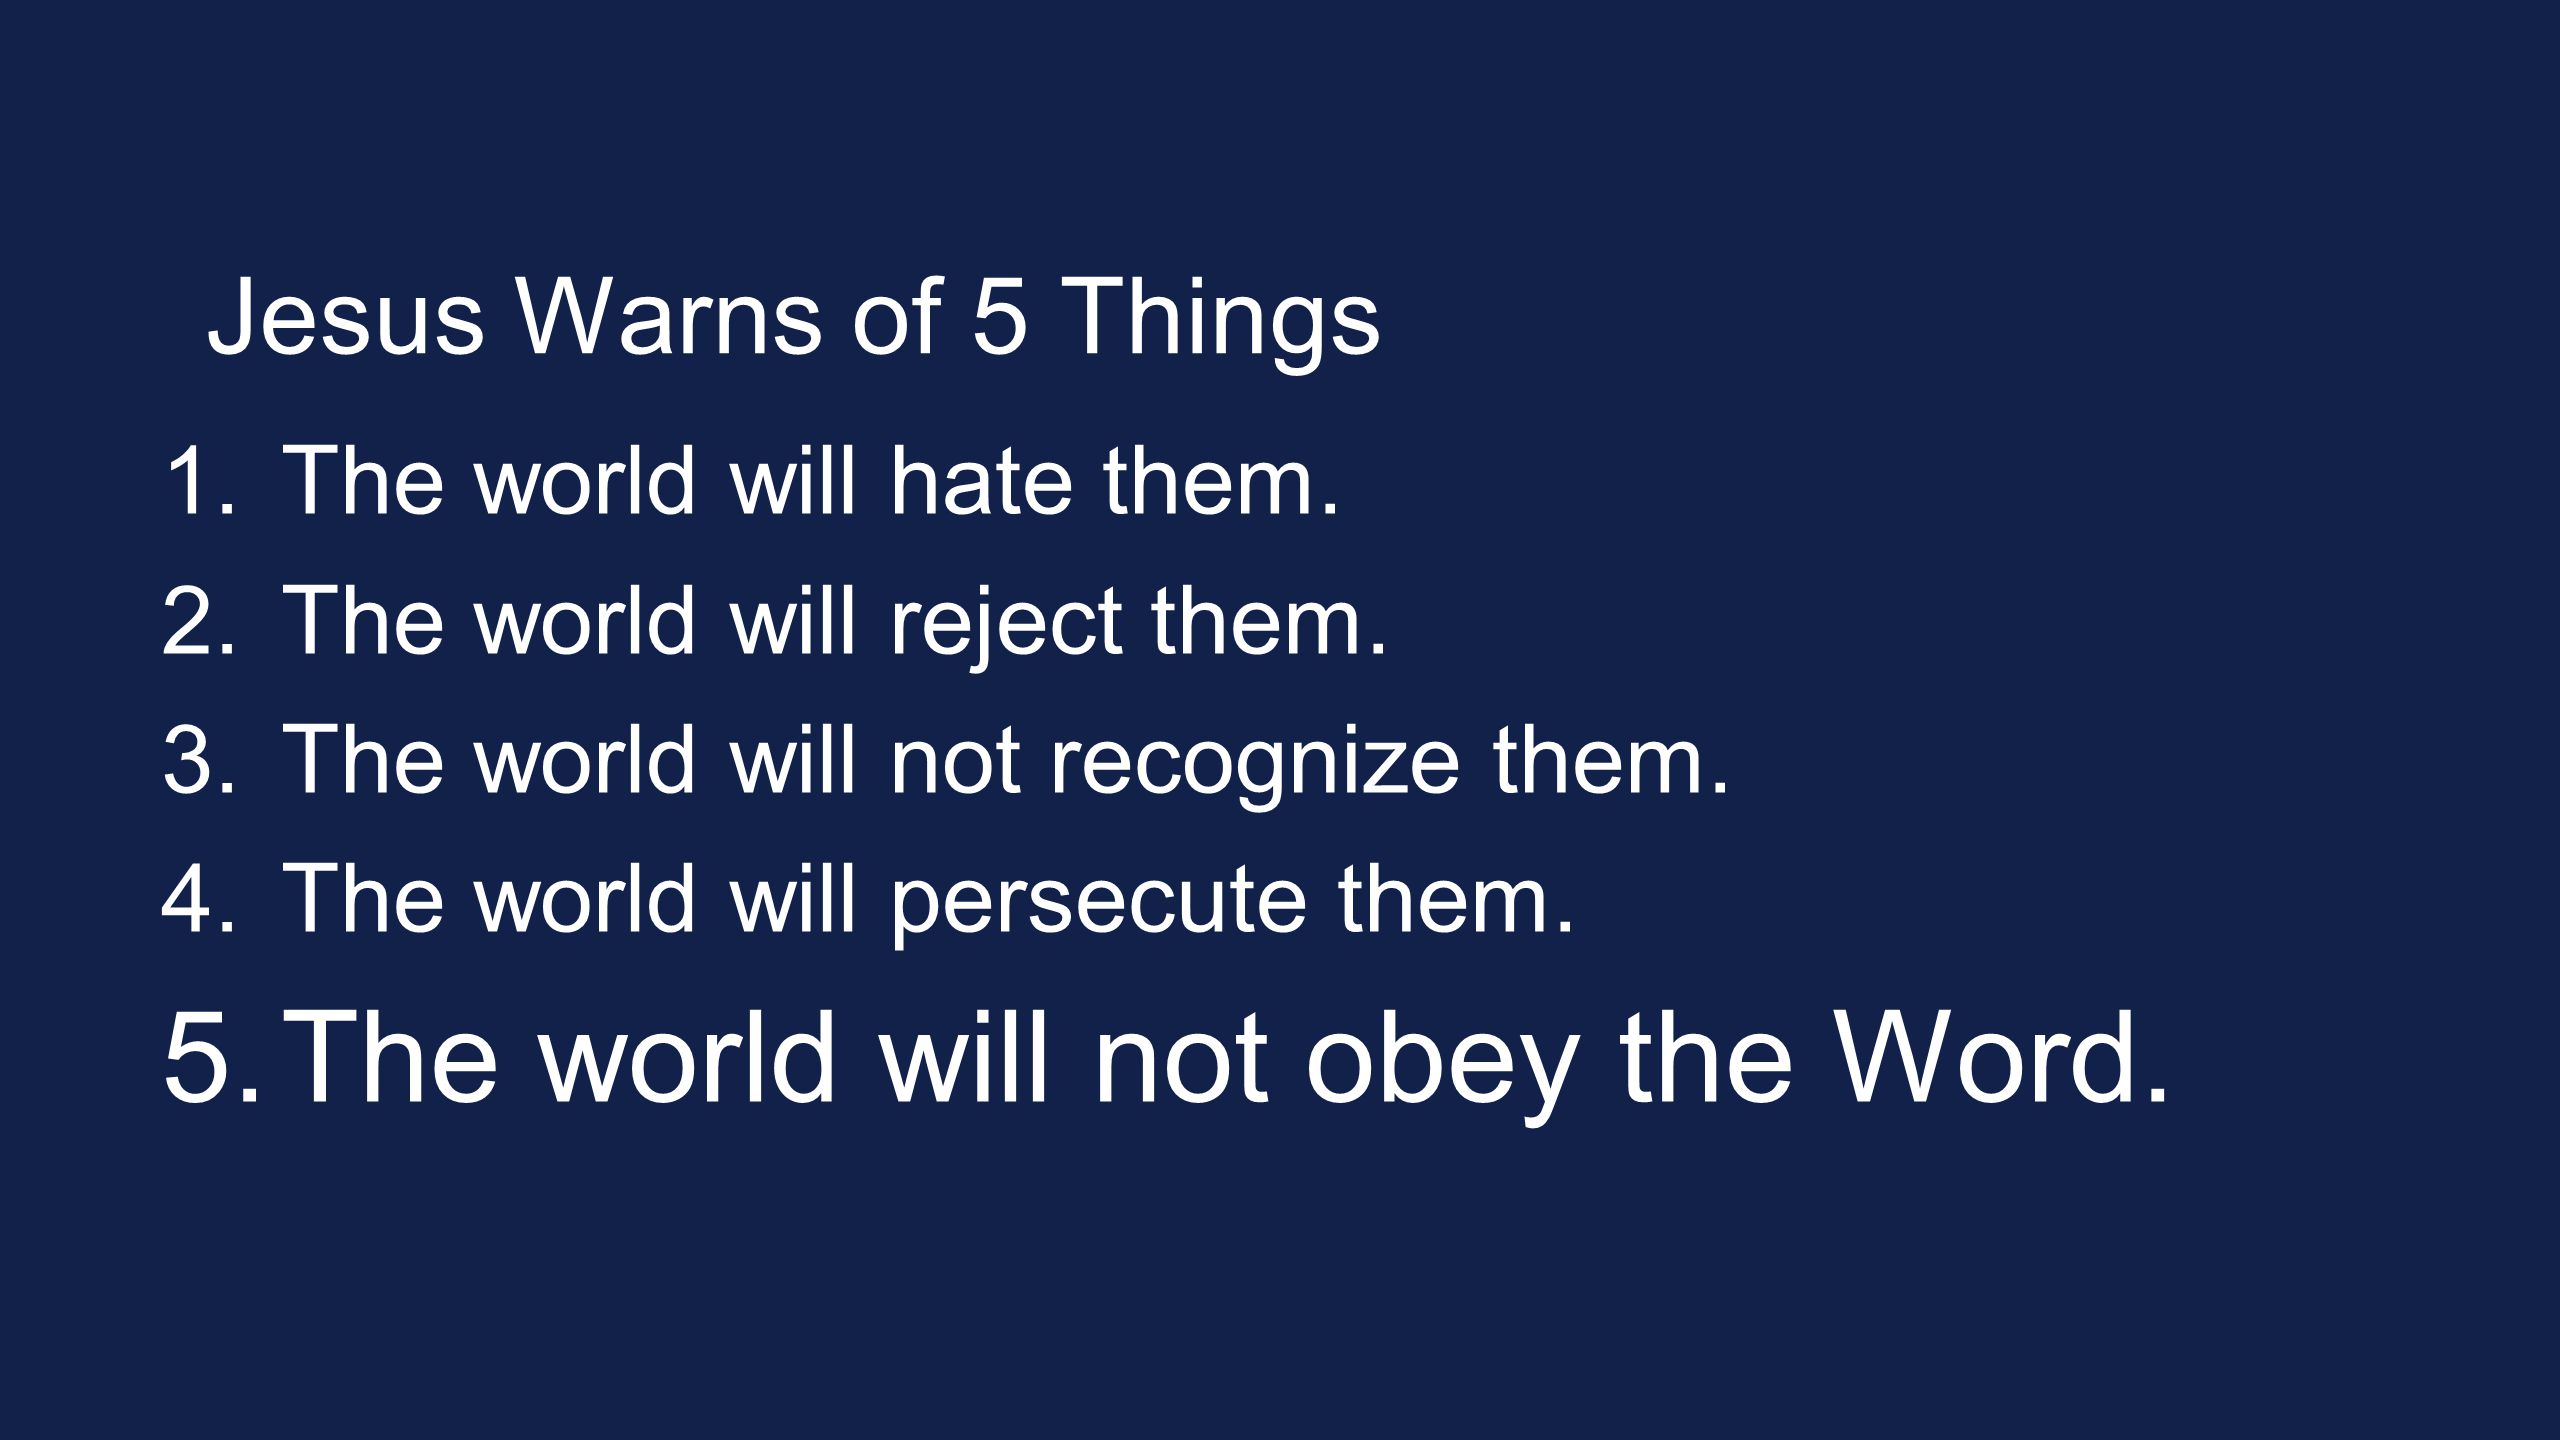 Jesus Warns of 5 Things 1. The world will hate them.